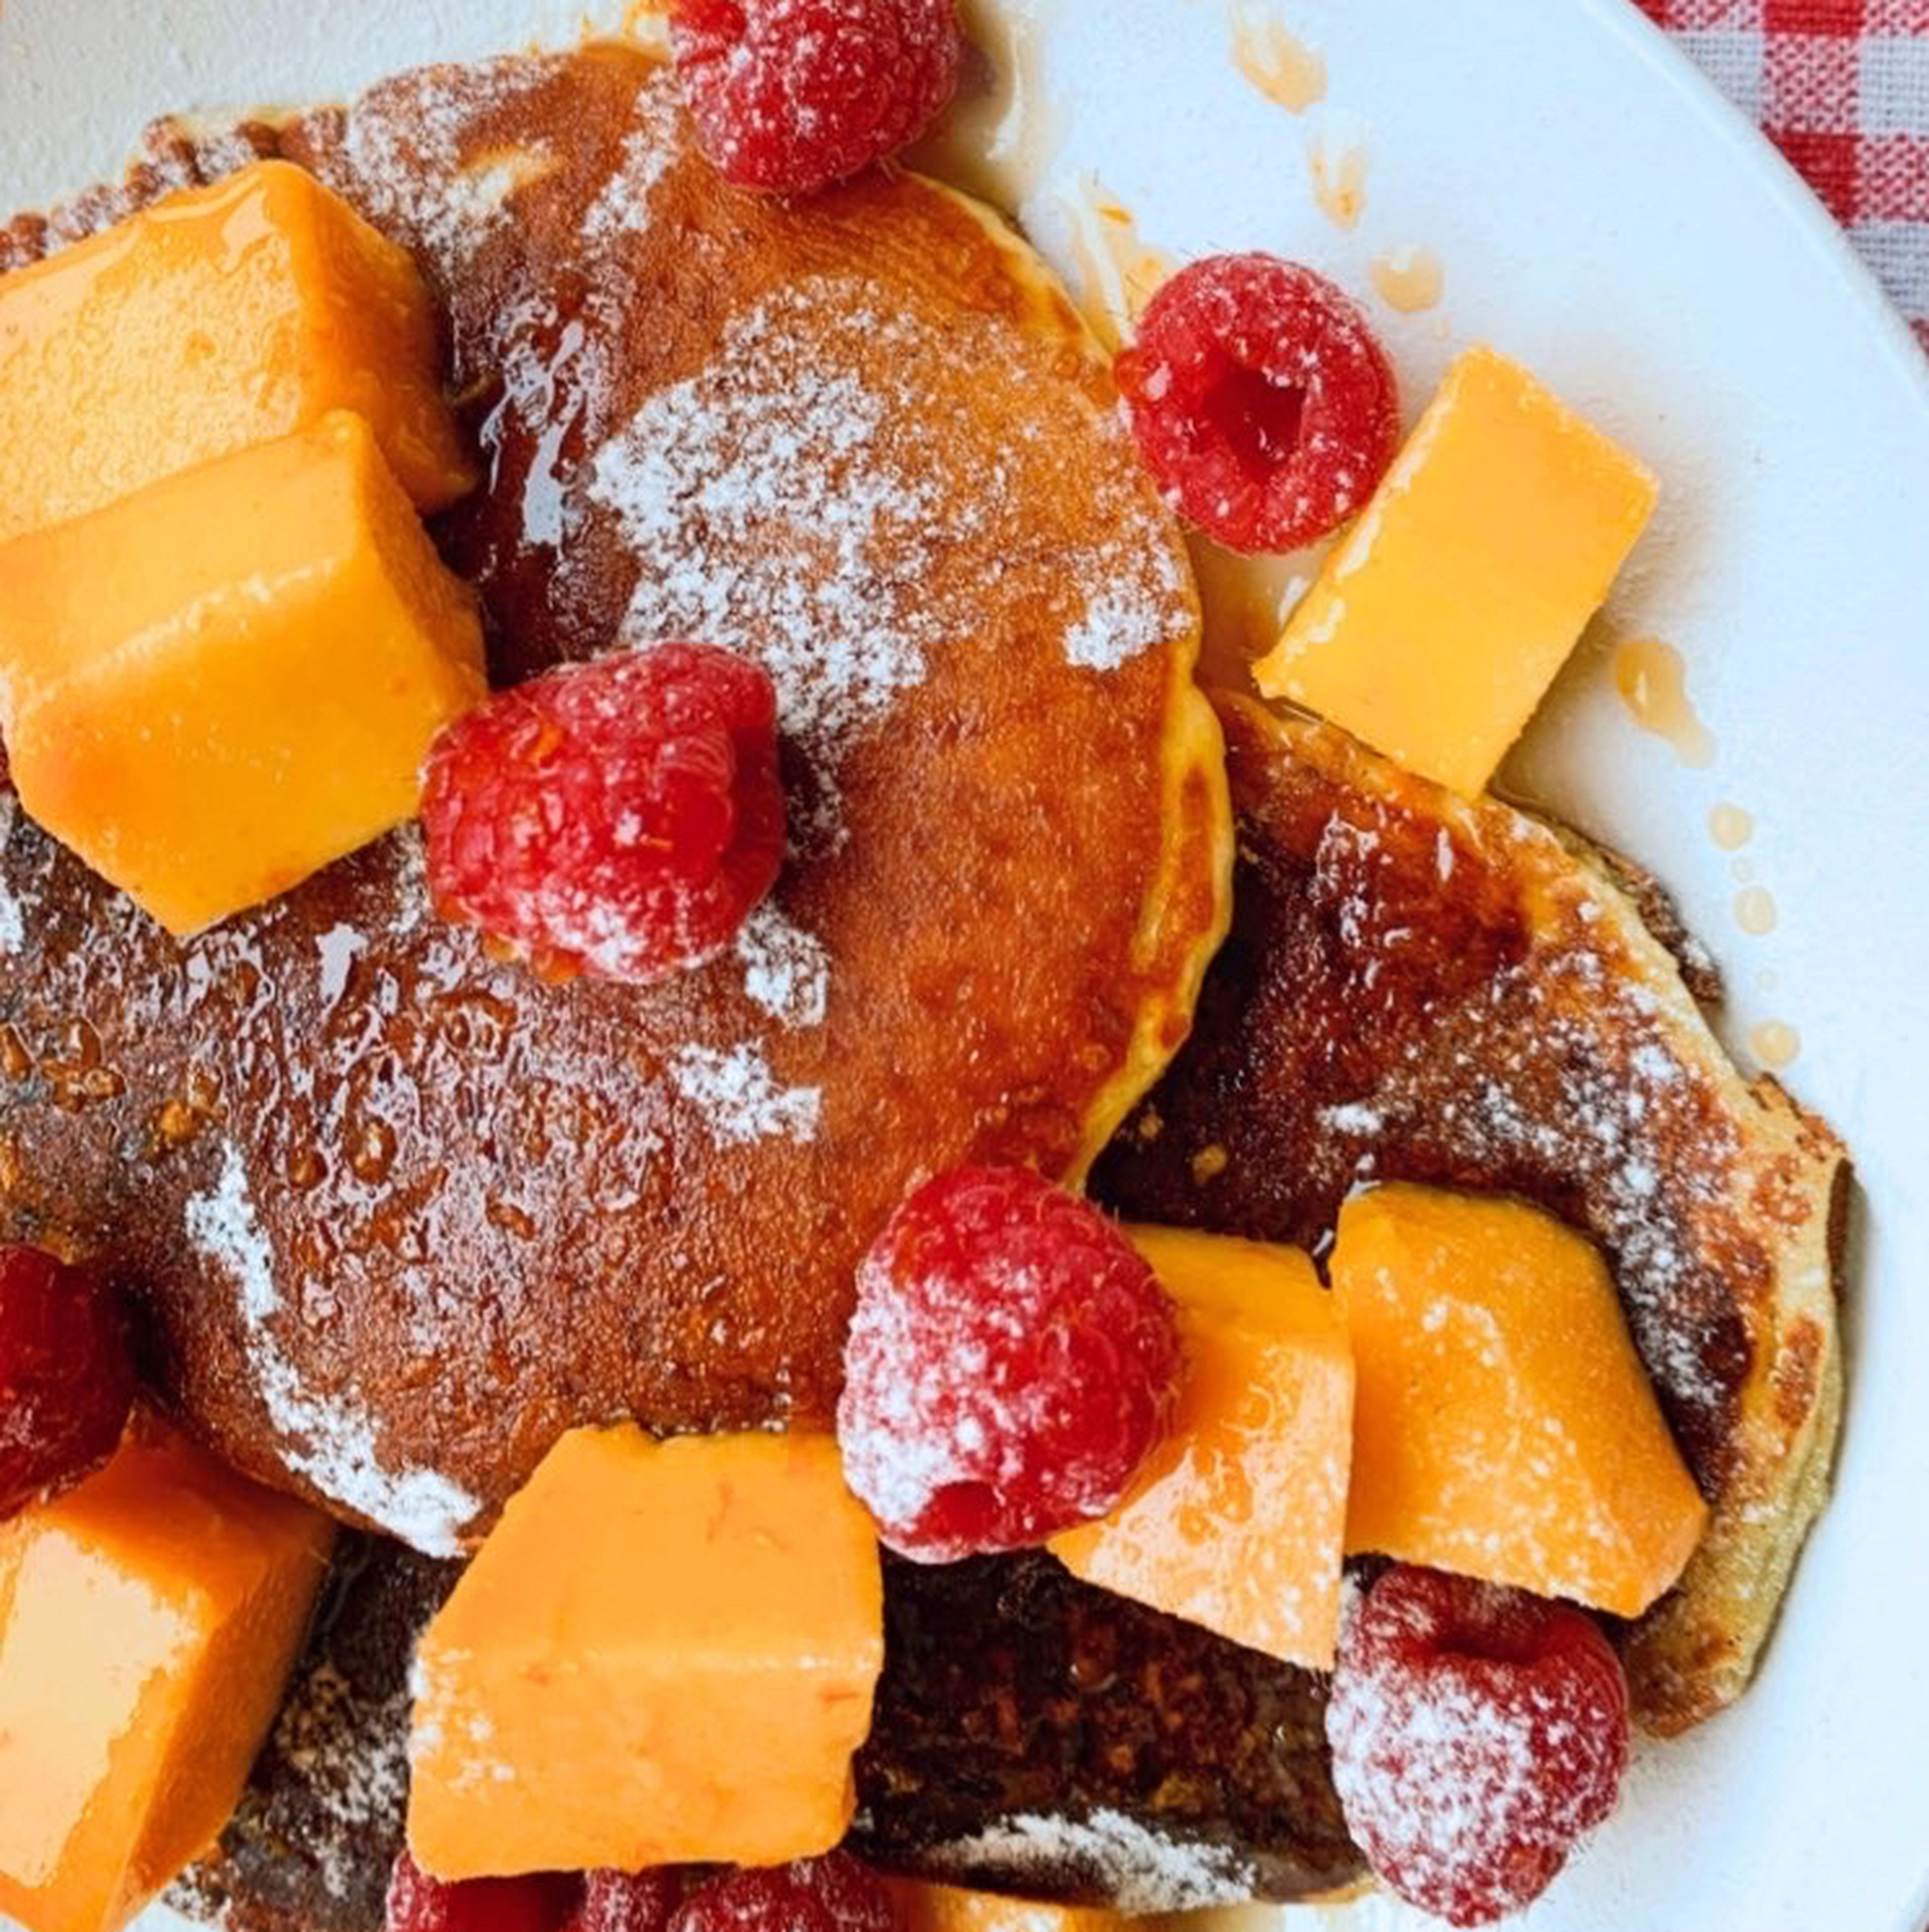 Plate the pancakes and top with fresh fruits. Lightly dust with flour and serve with the syrup as poured right before eating to prevent sogginess.